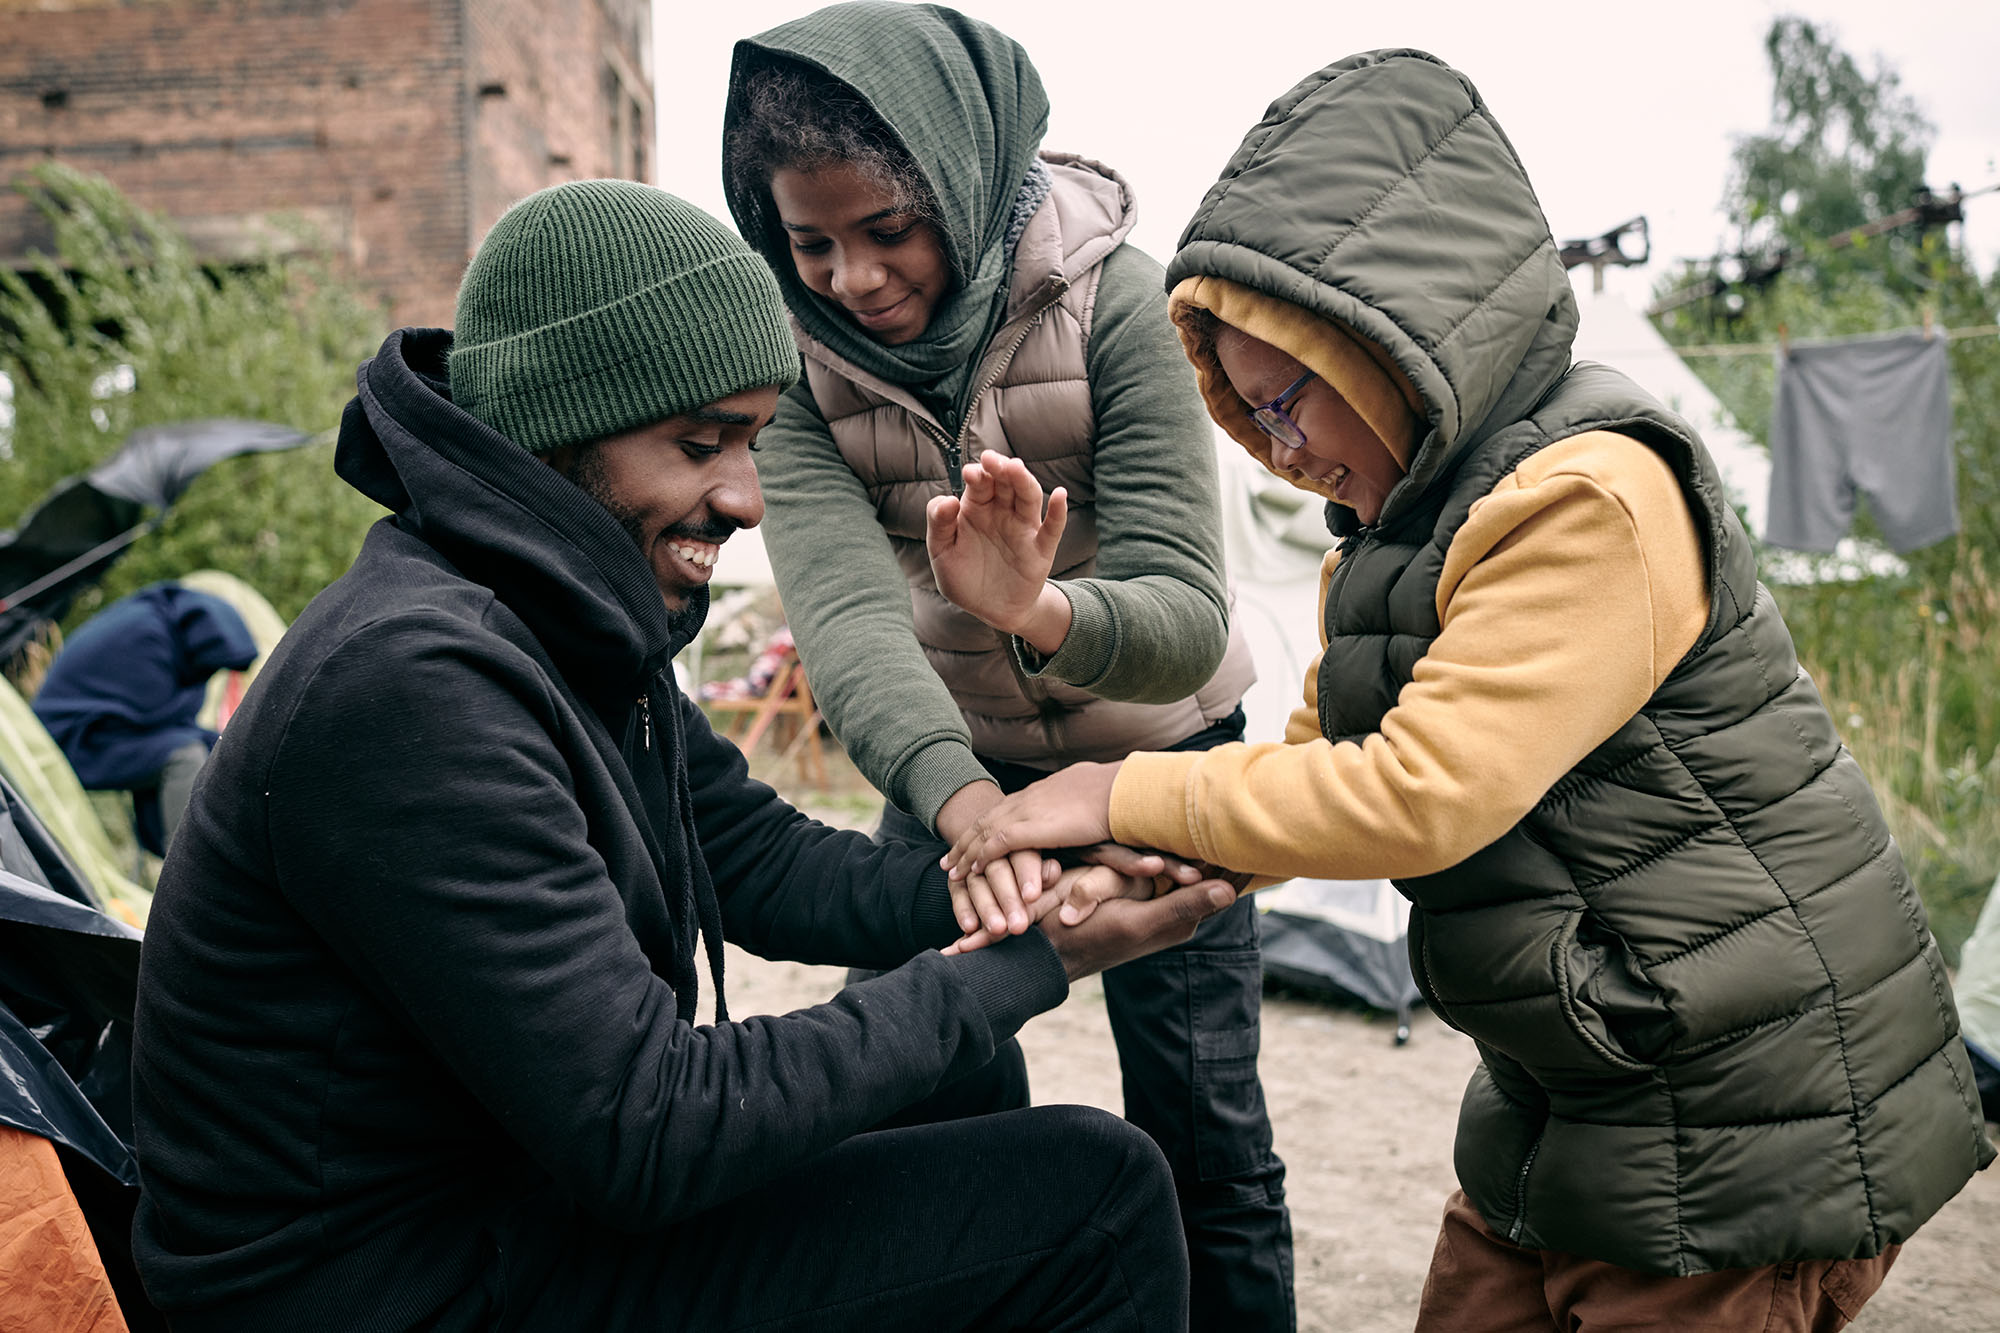 Positive young Black man in hat playing with kids against abandoned building and hanging clothes on rope in refugee camp